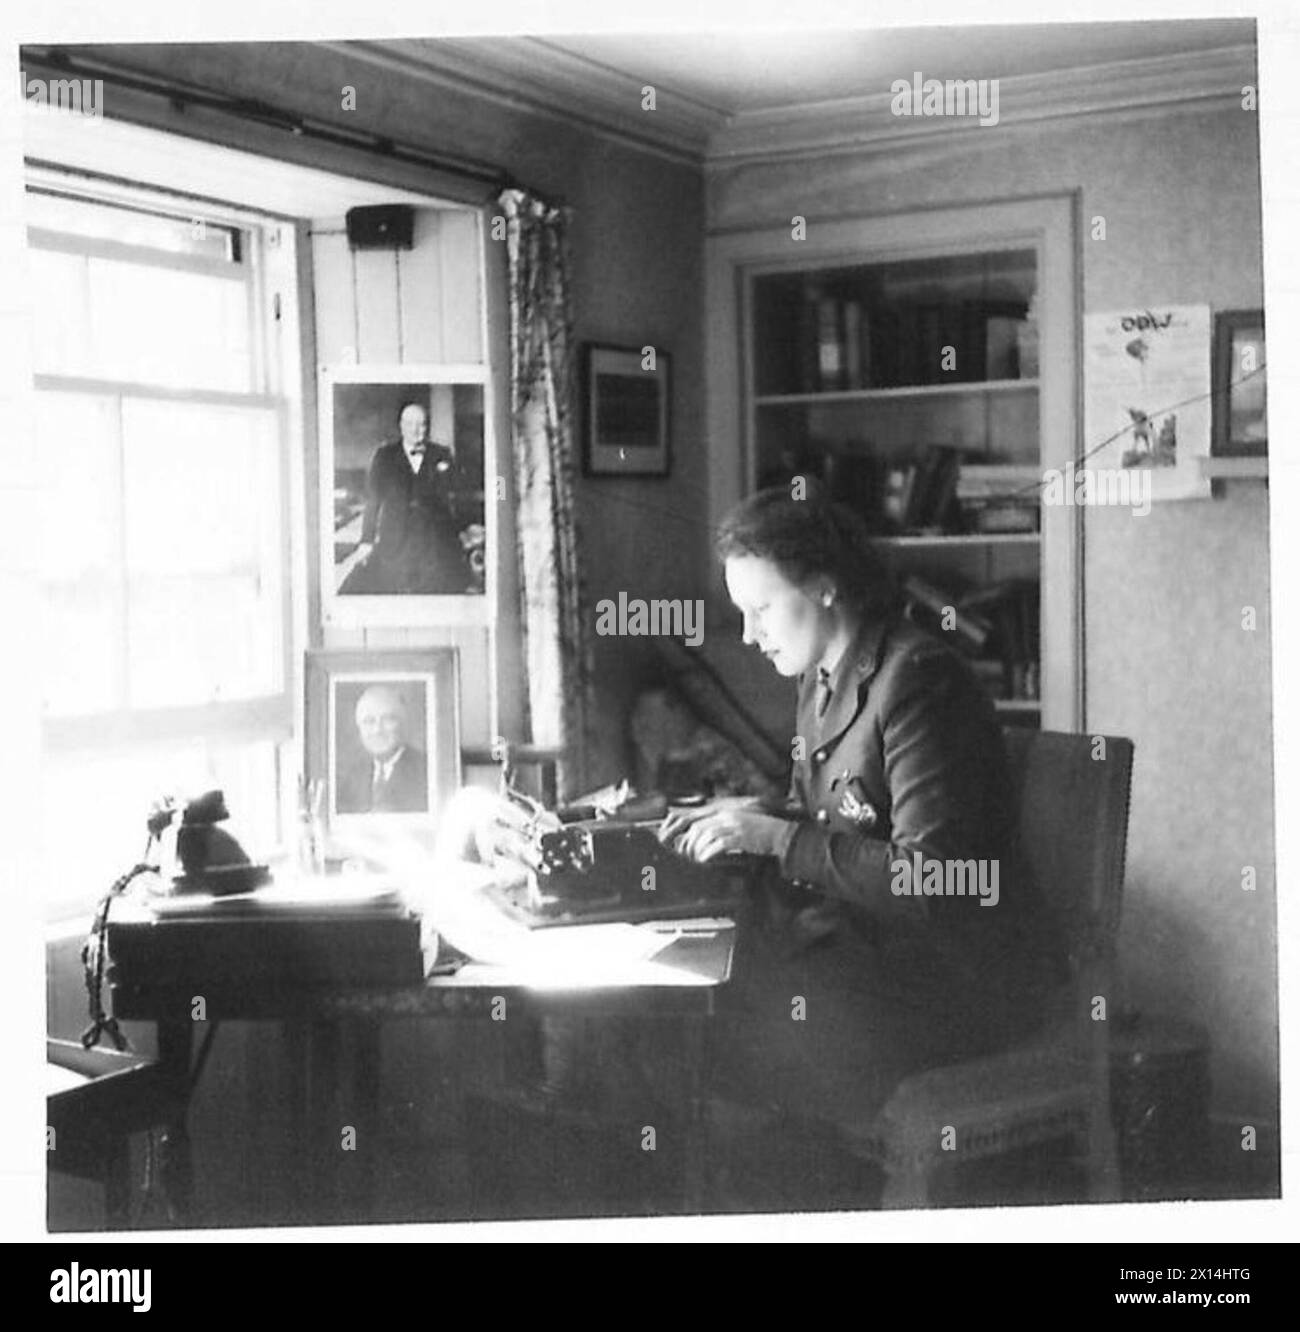 THE POLISH ARMY IN BRITAIN, 1940-1947 - Diana Napier was a well known actress and wife of Richard Tauber, the Austrian-born opera singer, in her private life. Diana Napier, a section commander of the First Aid Nursing Yeomanry (FANY) unit attached to the 1st Polish Corps, in her office at Cupar, 1 June 1941.The unit was presented with 62 ambulances from the USA in last 10 months. Mrs Napier was a creator of this medical unit and a first ambulance was a gift from her British Army, British Army, First Aid Nursing Yeomanry, Polish Army, Polish Armed Forces in the West, 1st Corps, Napier, Diana Stock Photo